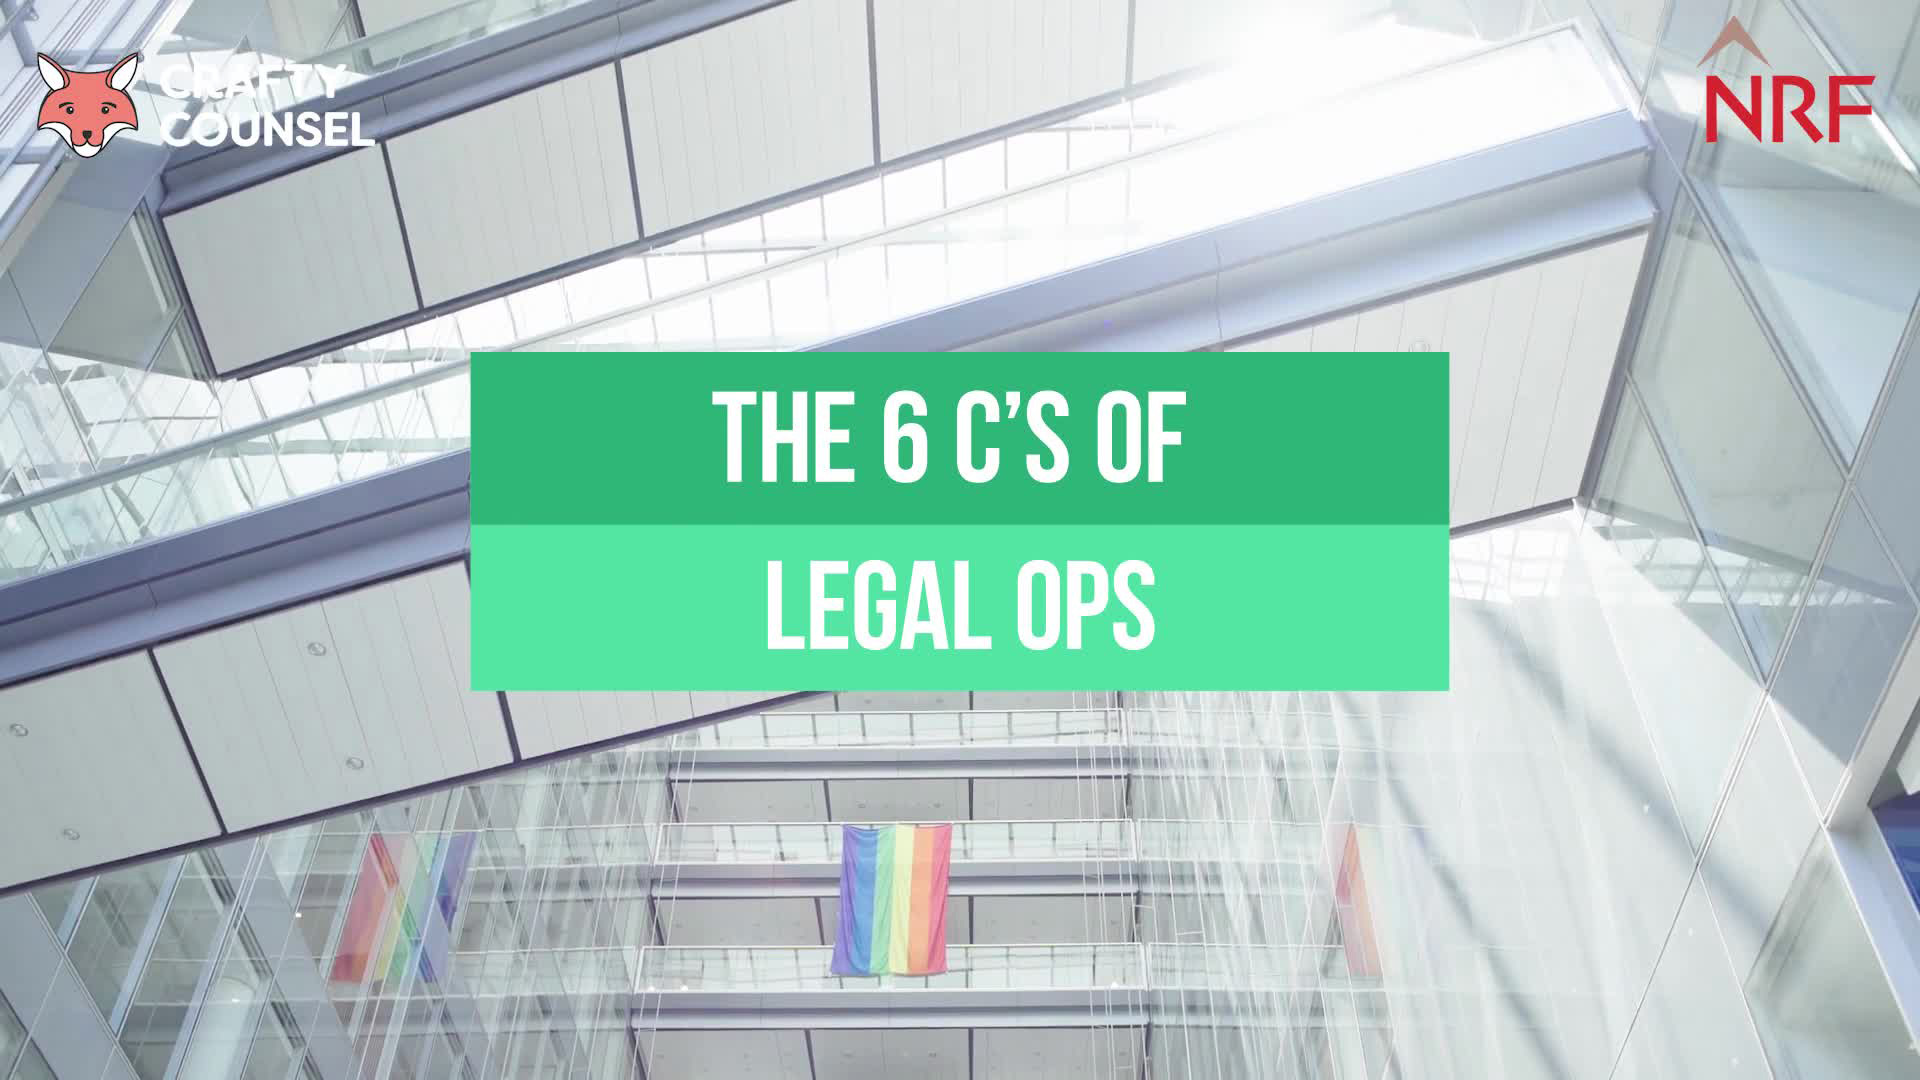 Episode 3: 6 C’s of Legal Ops – Consistency